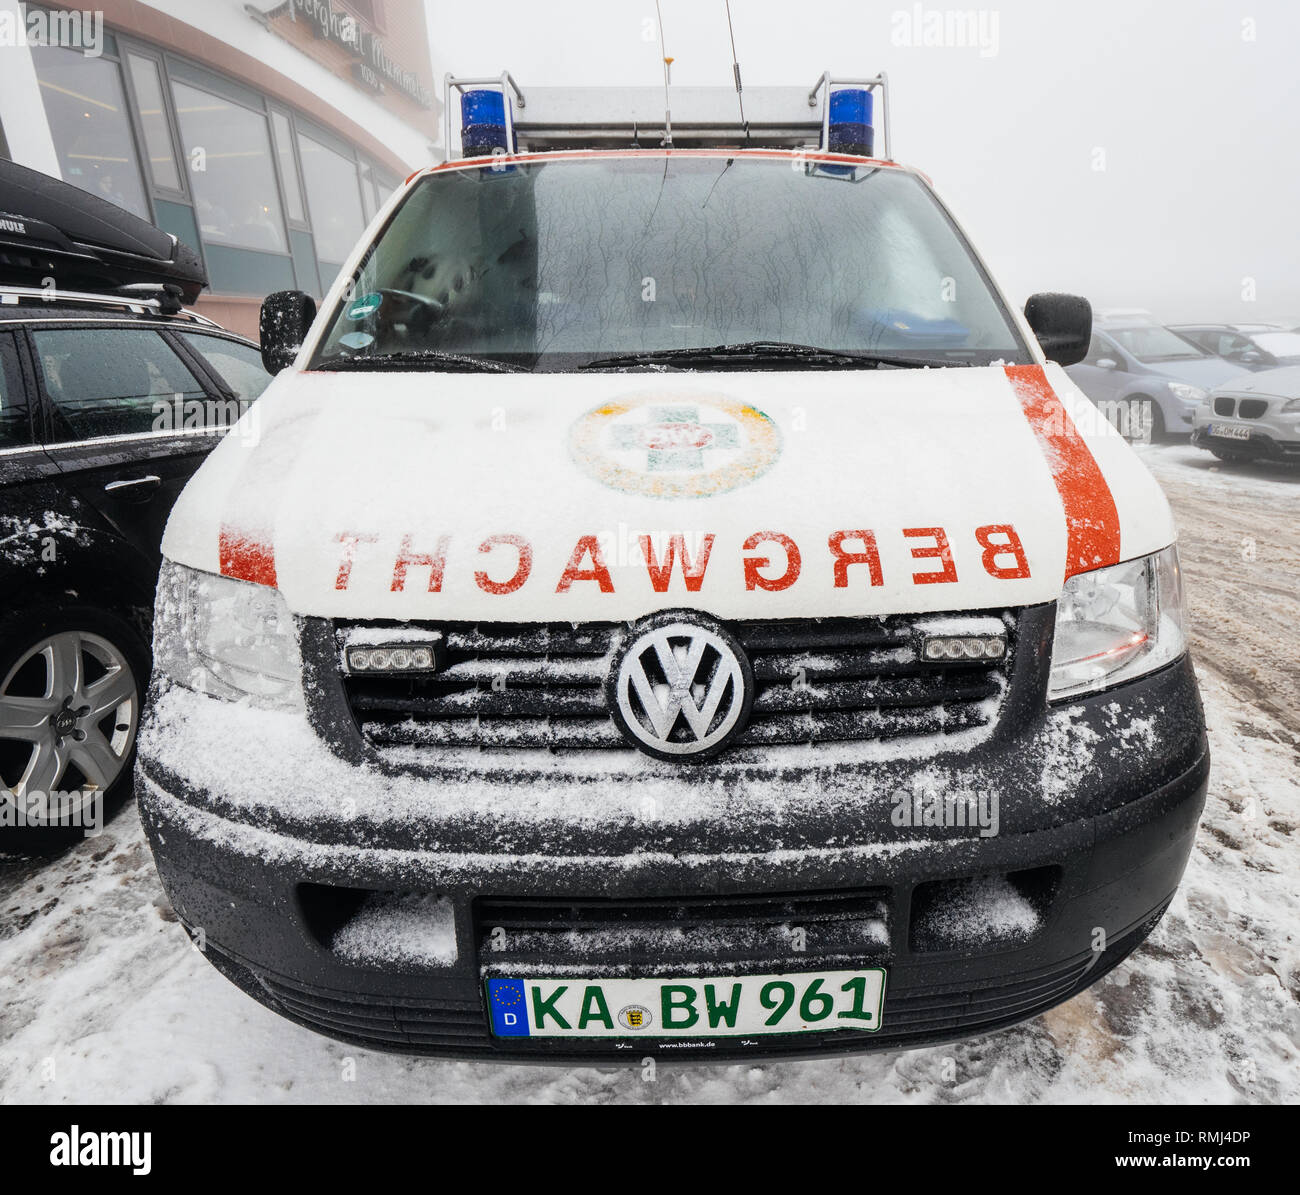 MUMMELSEE, GERMANY - JAN 26, 2019: Front view of Volkswagen VW Bergwacht Schwarzwald equipped van part of the German Red Cross (DRK-Bergwacht) mountain rescue and nature conservation  Stock Photo